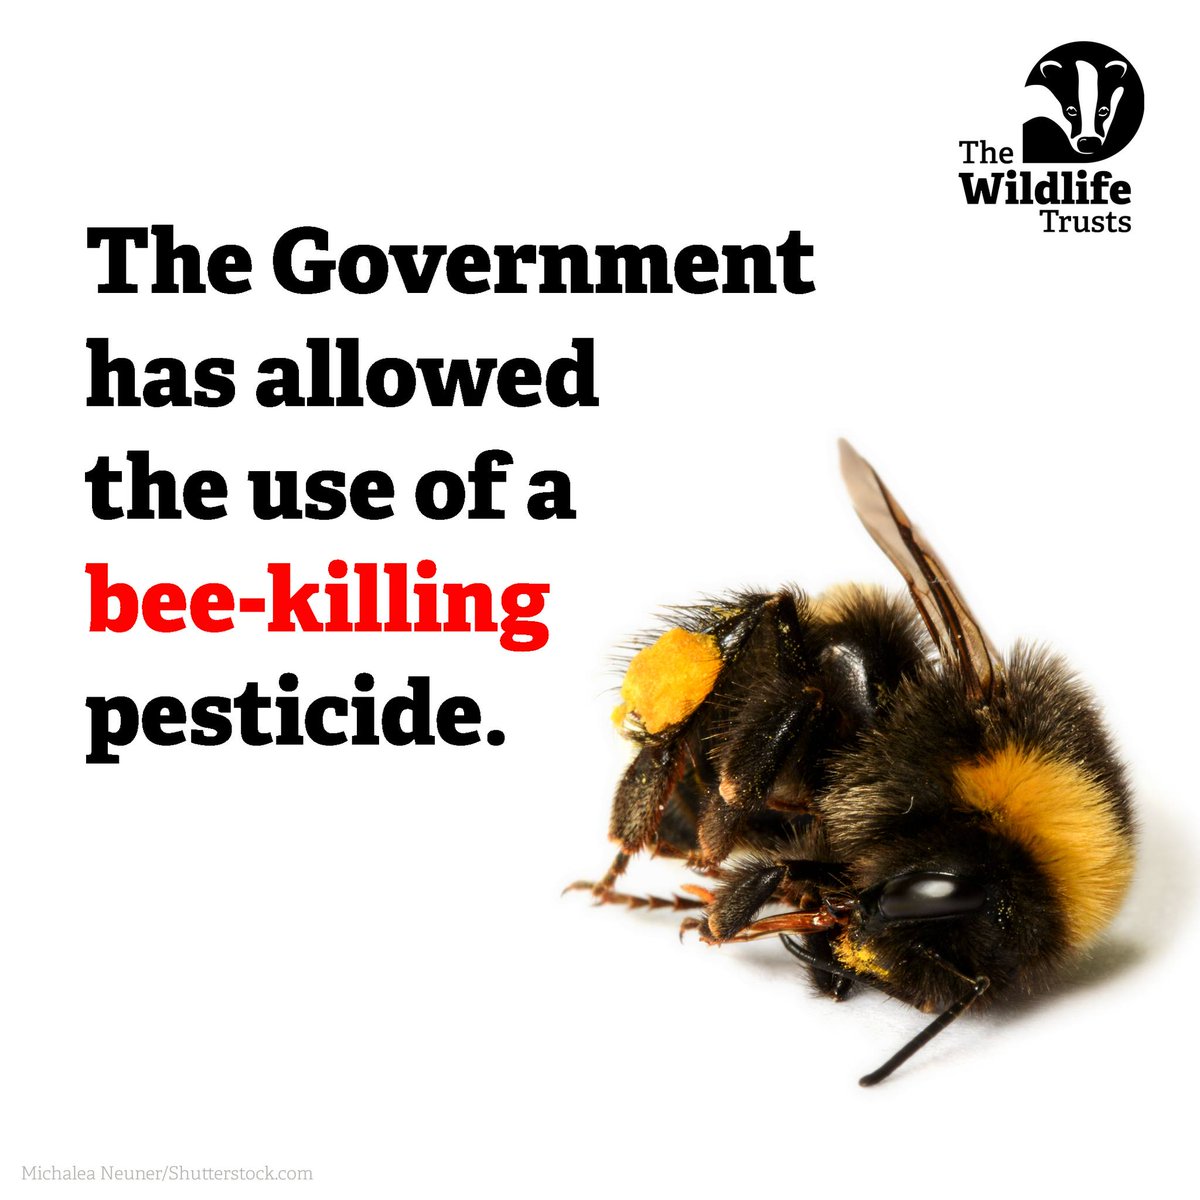 For the third year in a row, UK Gov has: 
❌Approved the use of a banned bee-killing pesticide. 
🐝 Gone against the advice of its own experts. 

Urge your MP to debate the use of banned pesticides on 1 Feb & we could put a stop to this. #SayNoToNeonics - wtru.st/say-no-neonics…